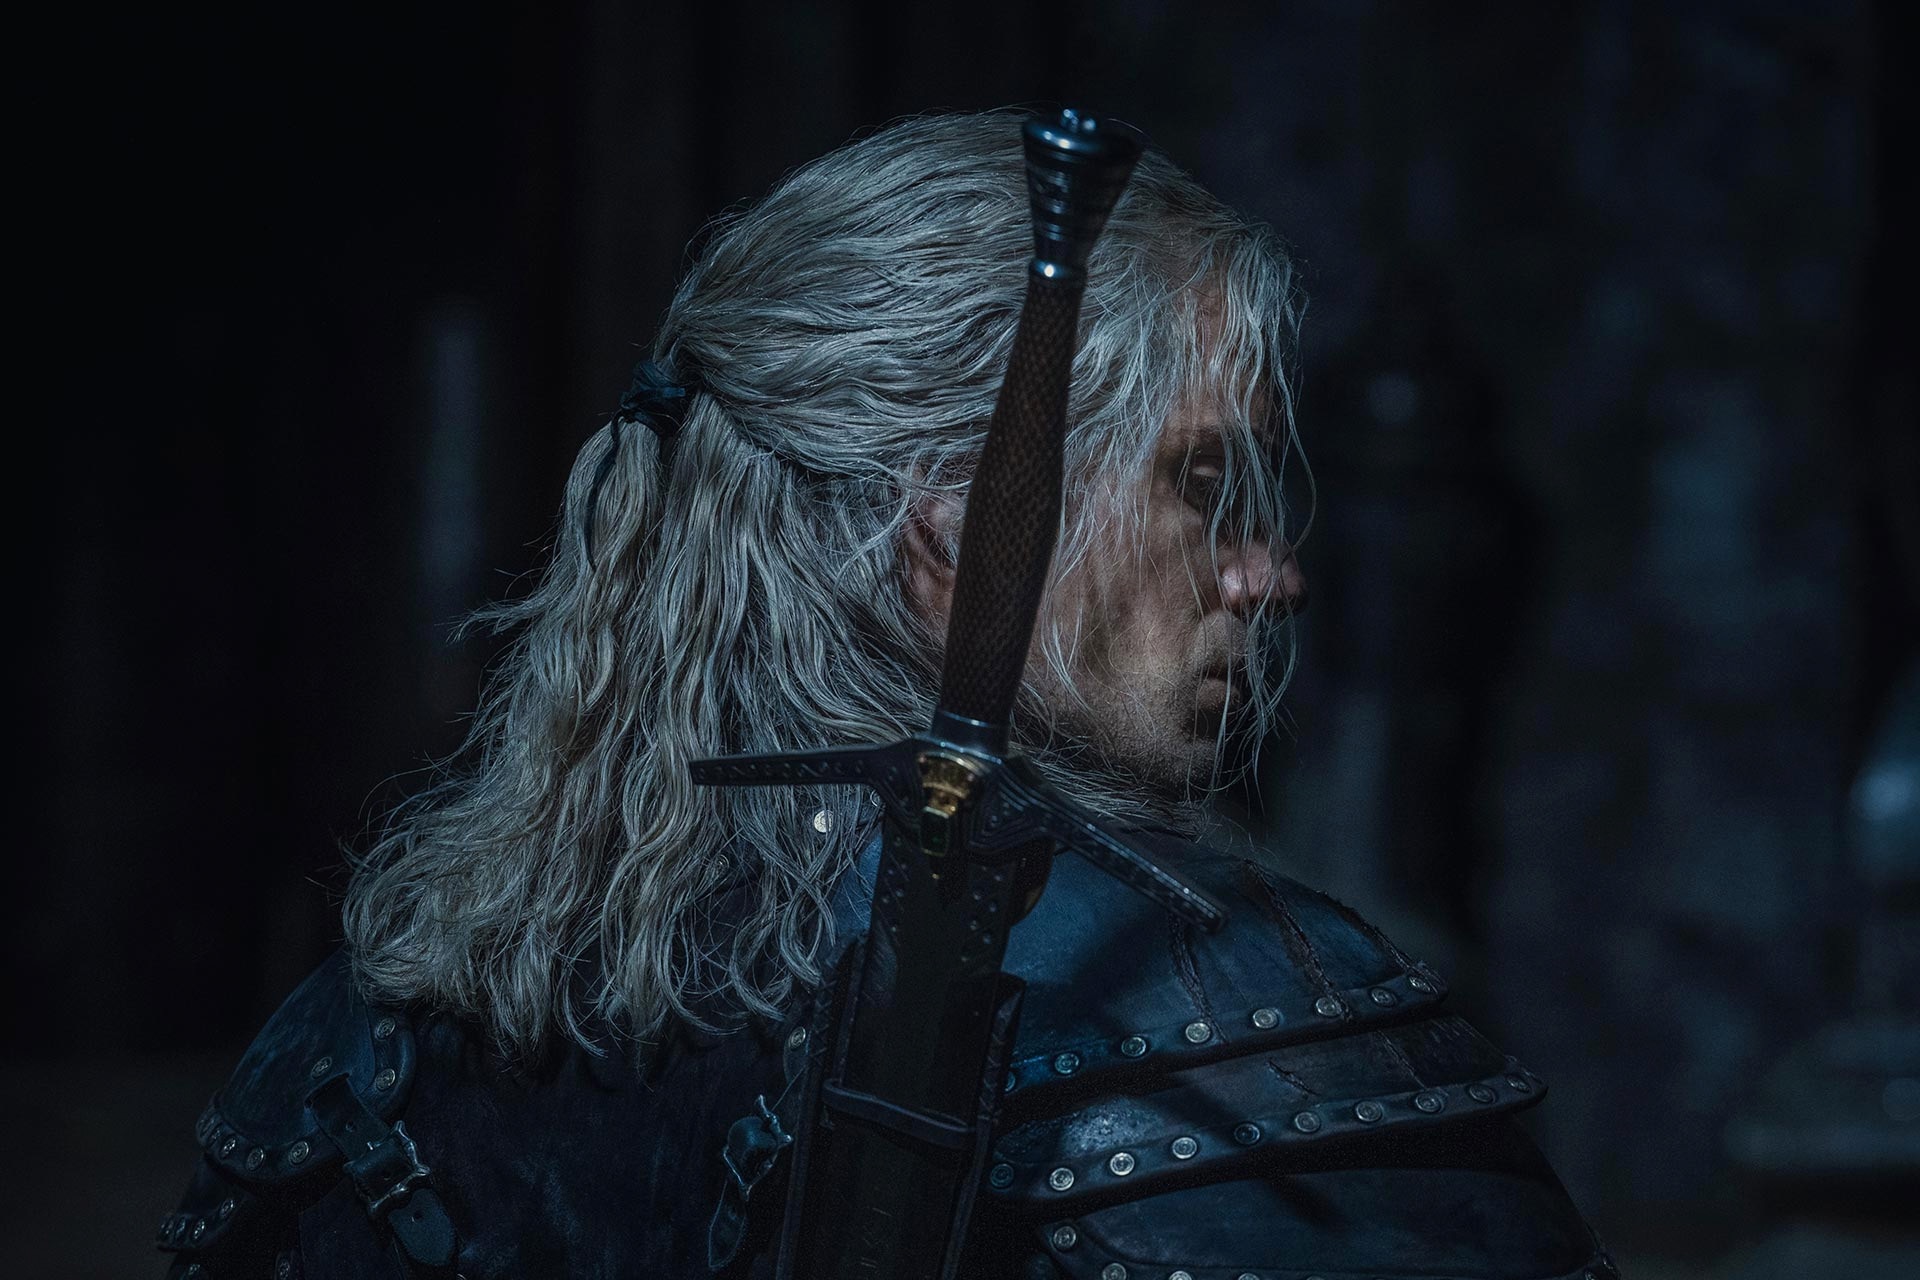 Behold, the complete CAST - The Witcher - Netflix Series